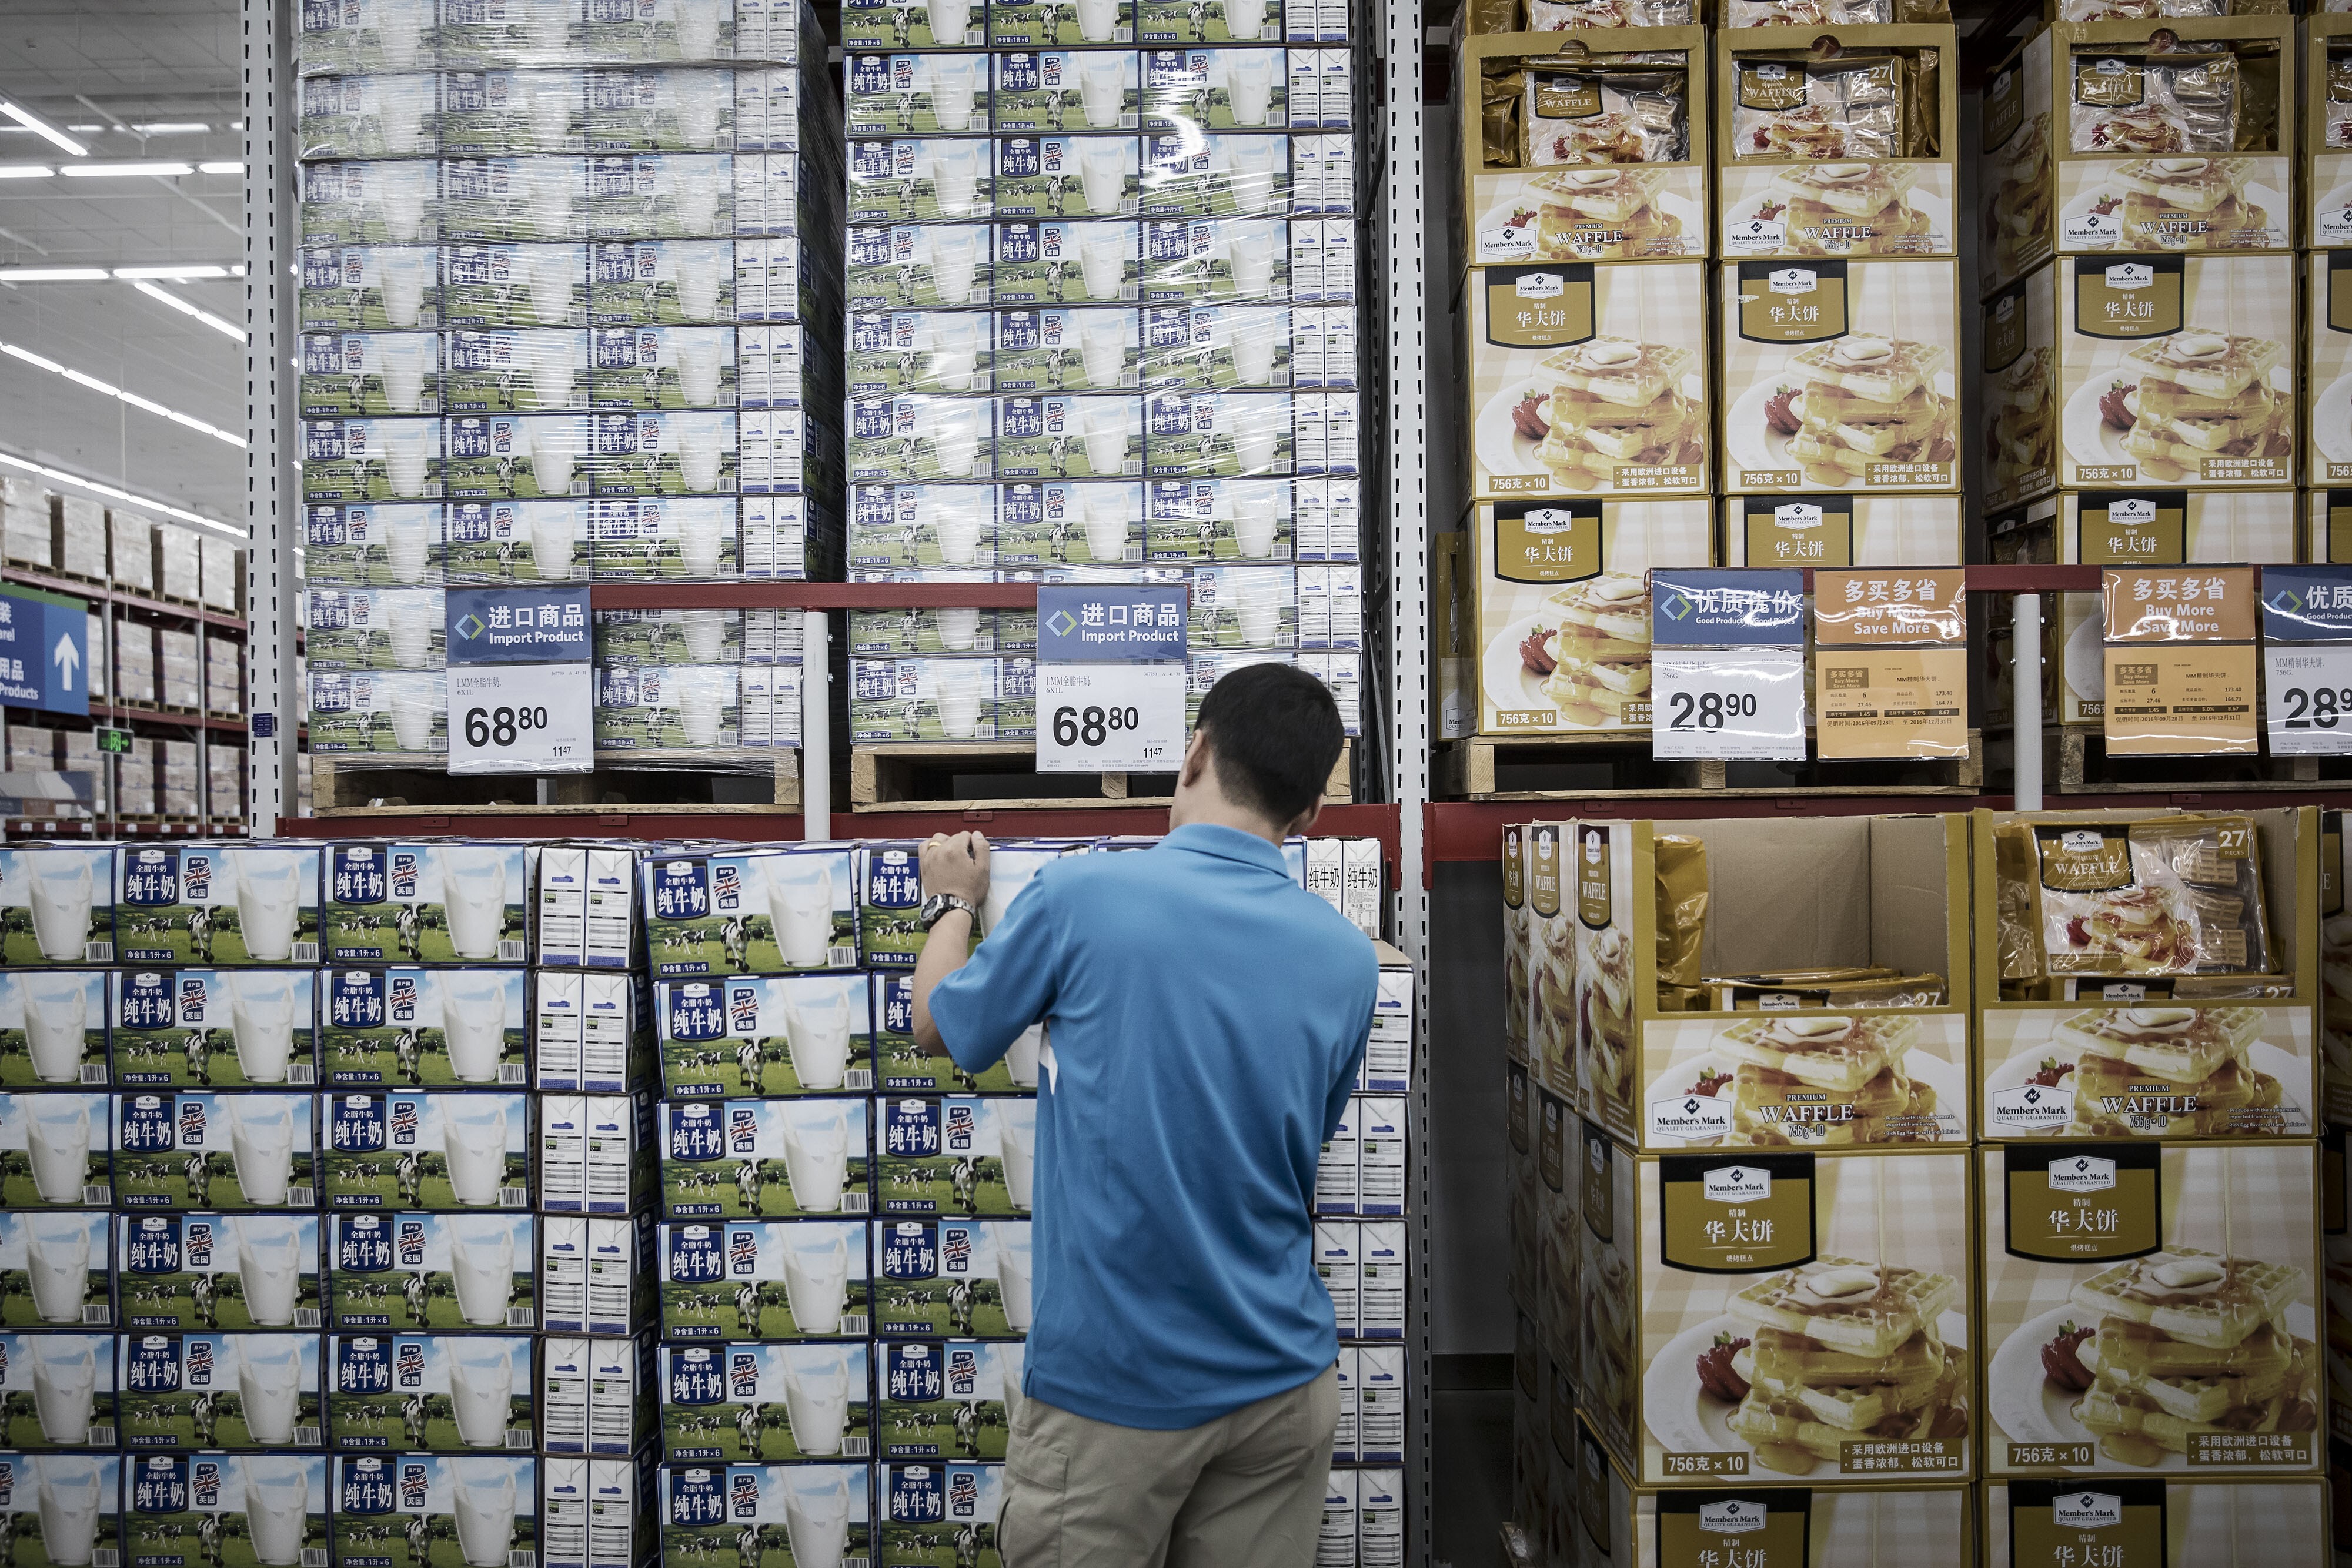 China’s strong demand for overseas-made infant formula started in 2008 after the so-called melamine scandal, when 300,000 children were poisoned after drinking contaminated products. Photo: Bloomberg